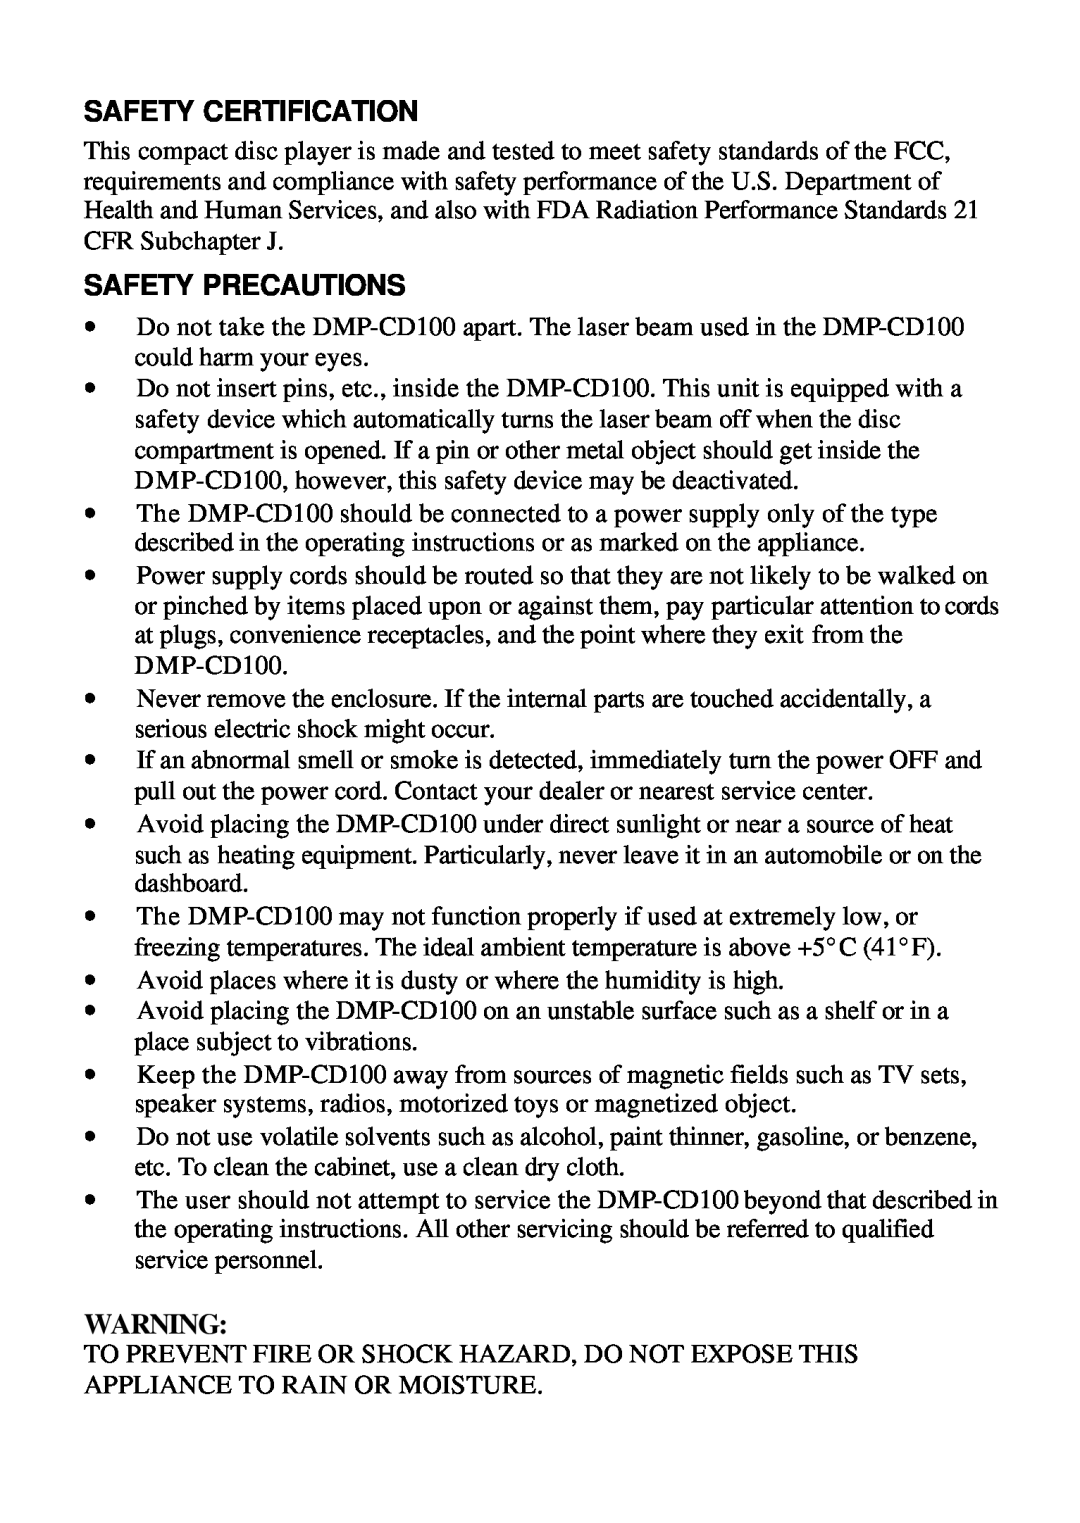 D-Link DMP-CD100 user manual Safety Certification, Safety Precautions 